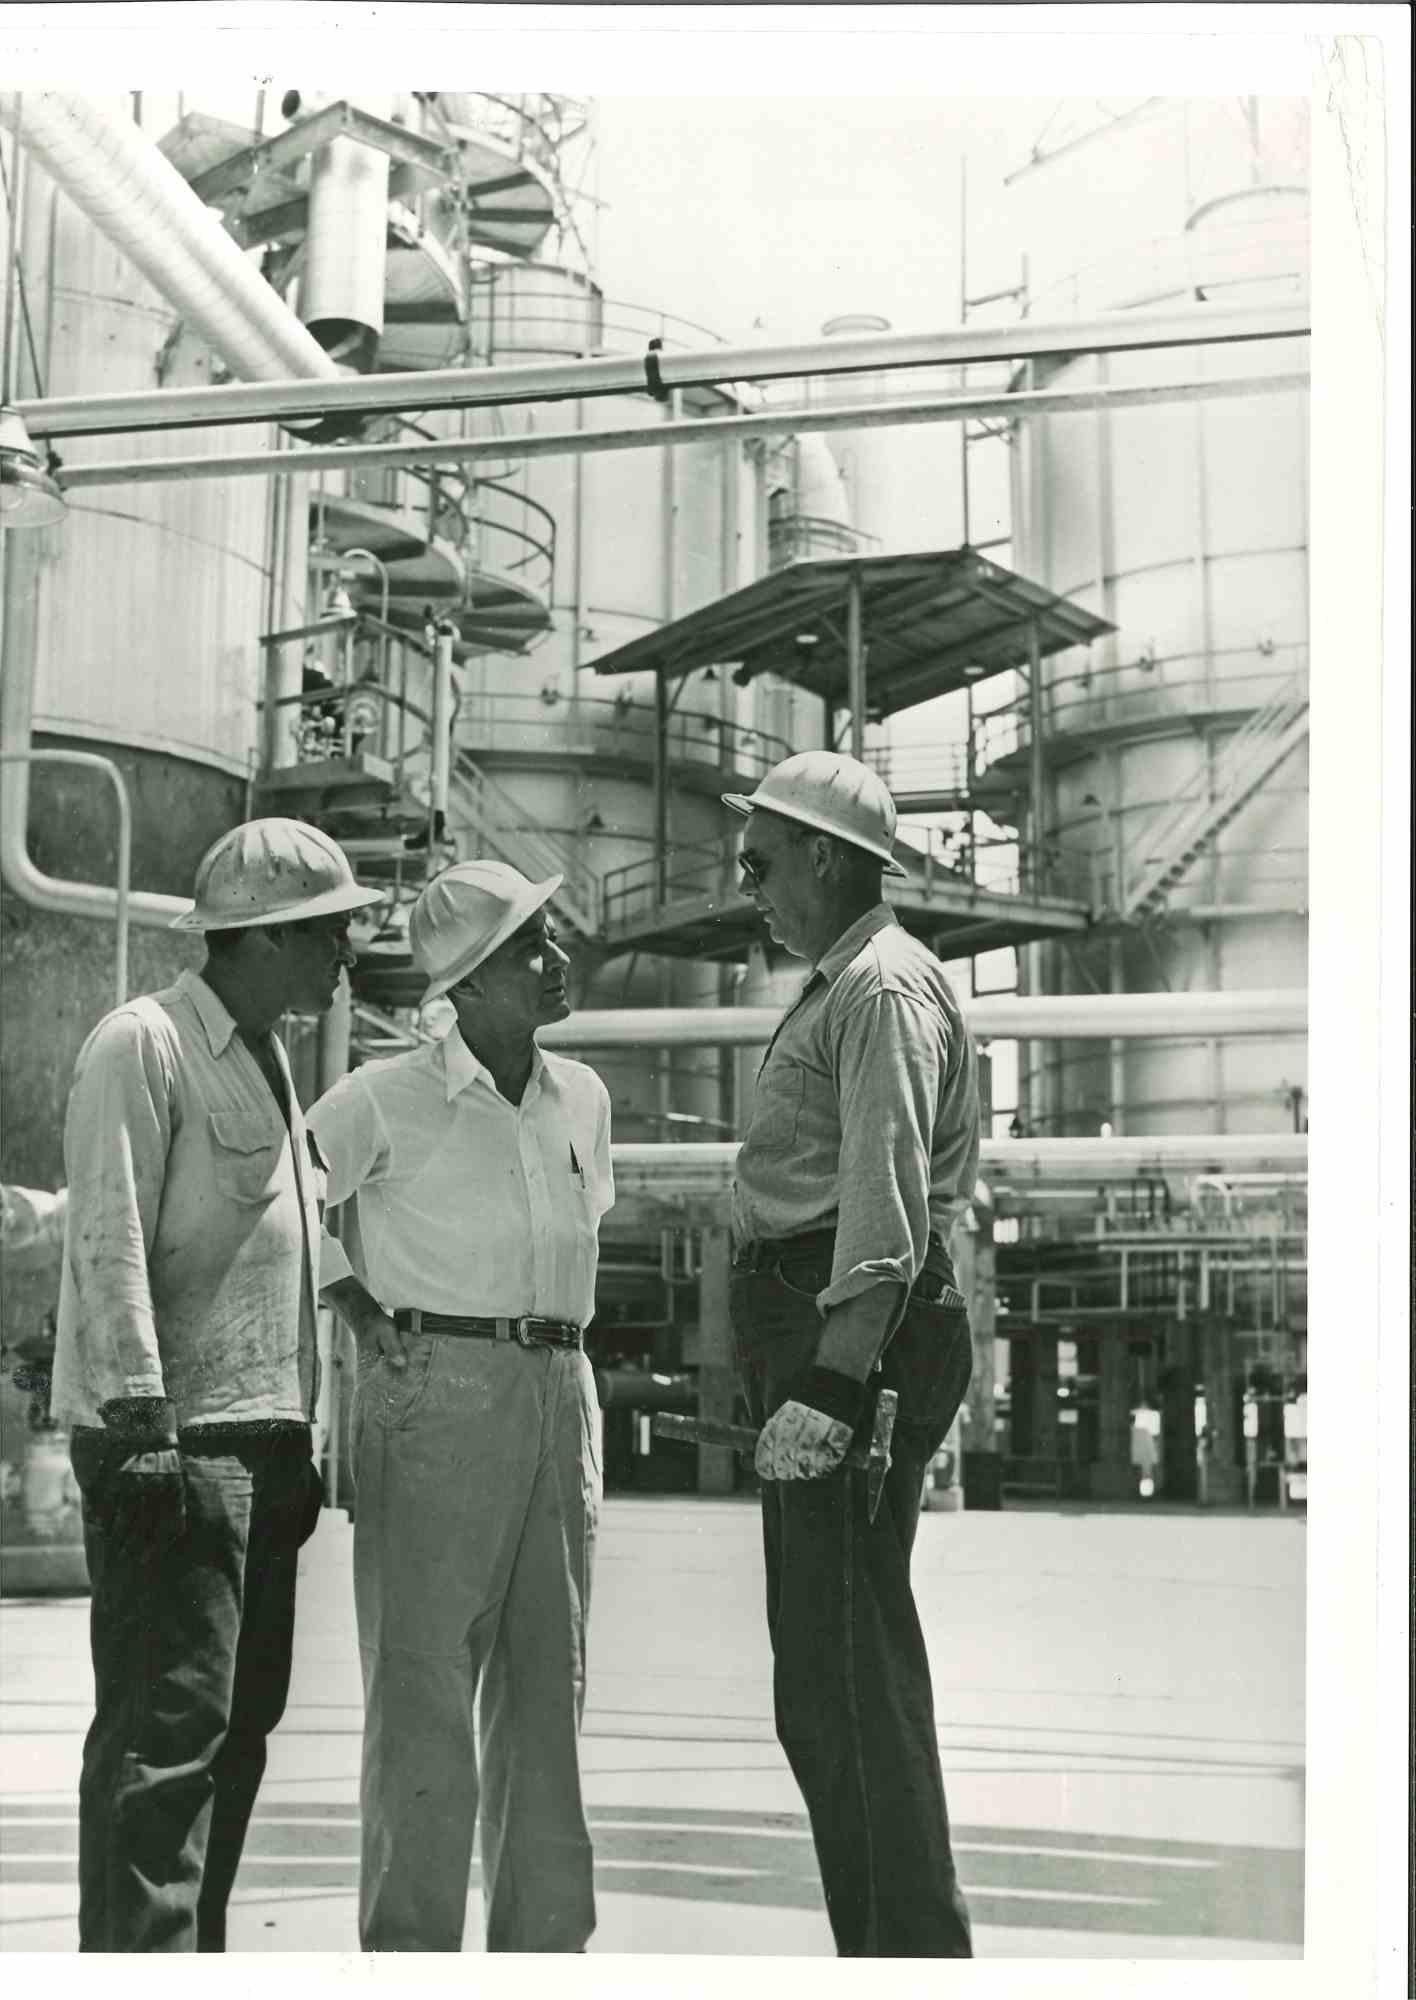 Unknown Figurative Photograph - Religion in Industry - Vintage Photograph - Mid 20th Century